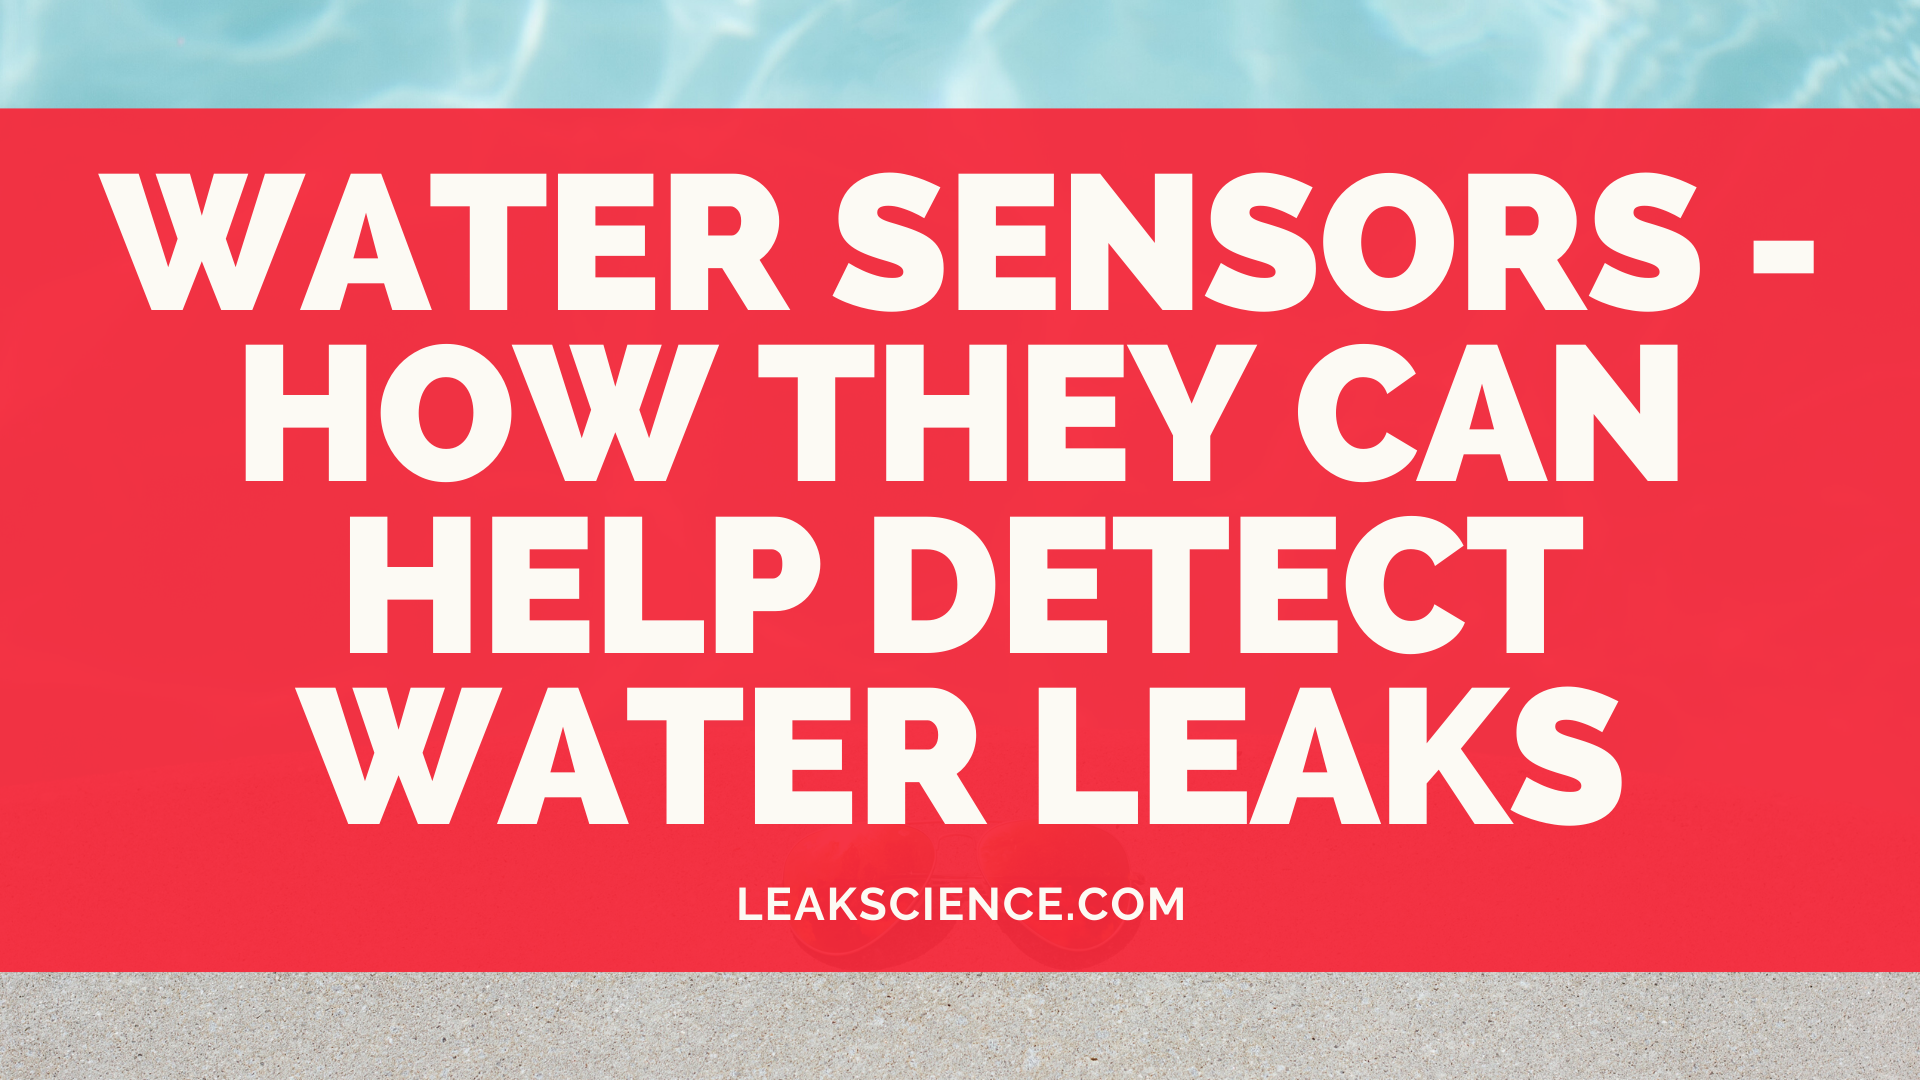 Water Sensors - How They Can Help Detect Water Leaks